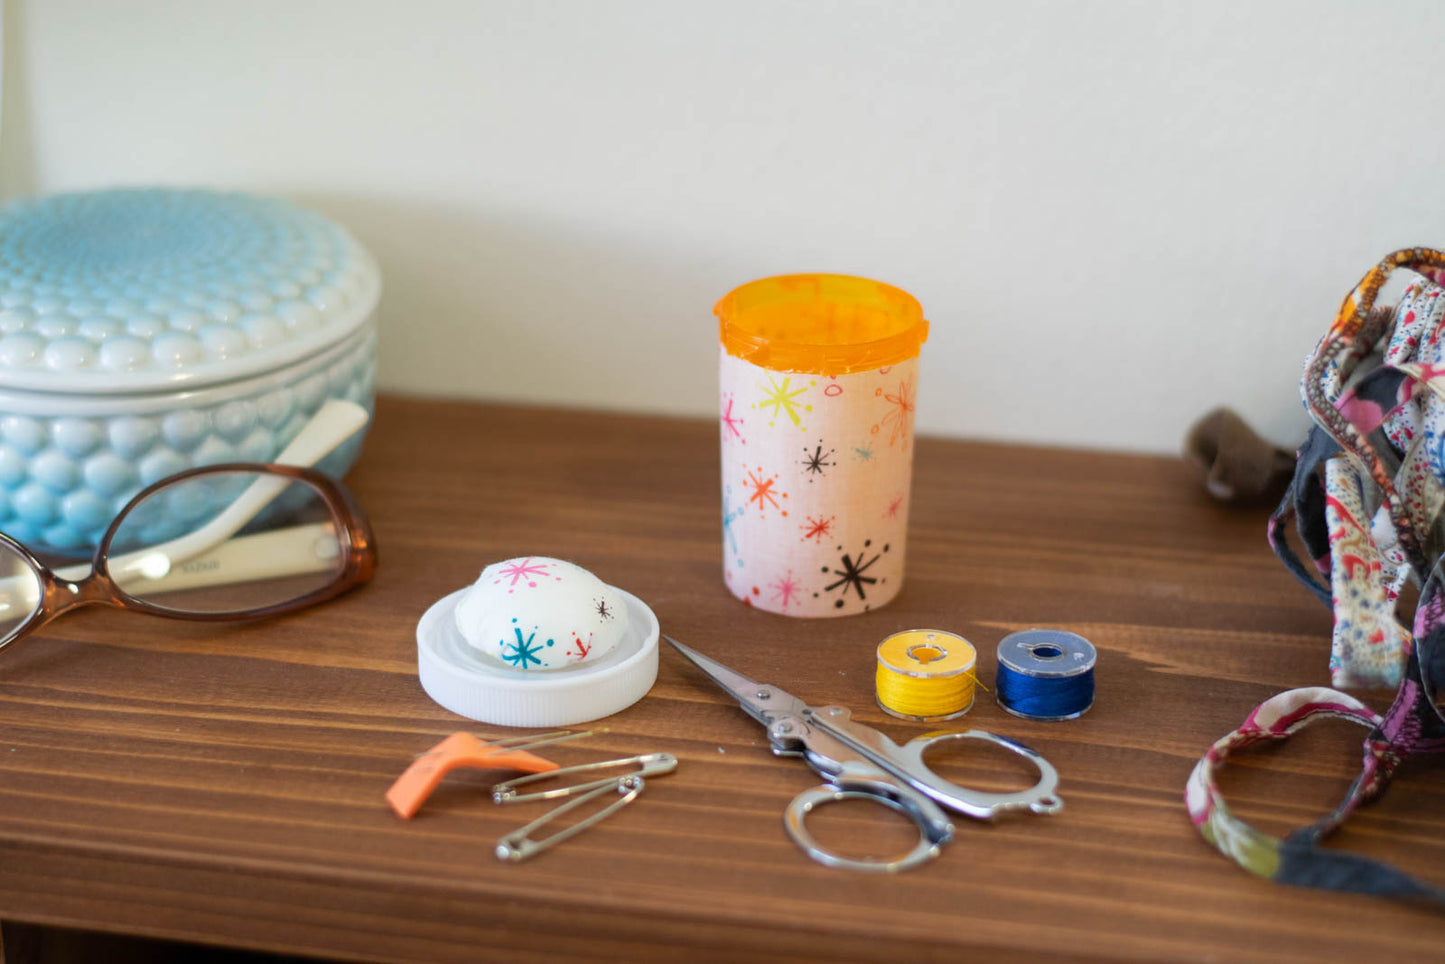 upcycled prescription bottle sewing kit — multi color sparkles on white, 2.75" high, open with contents